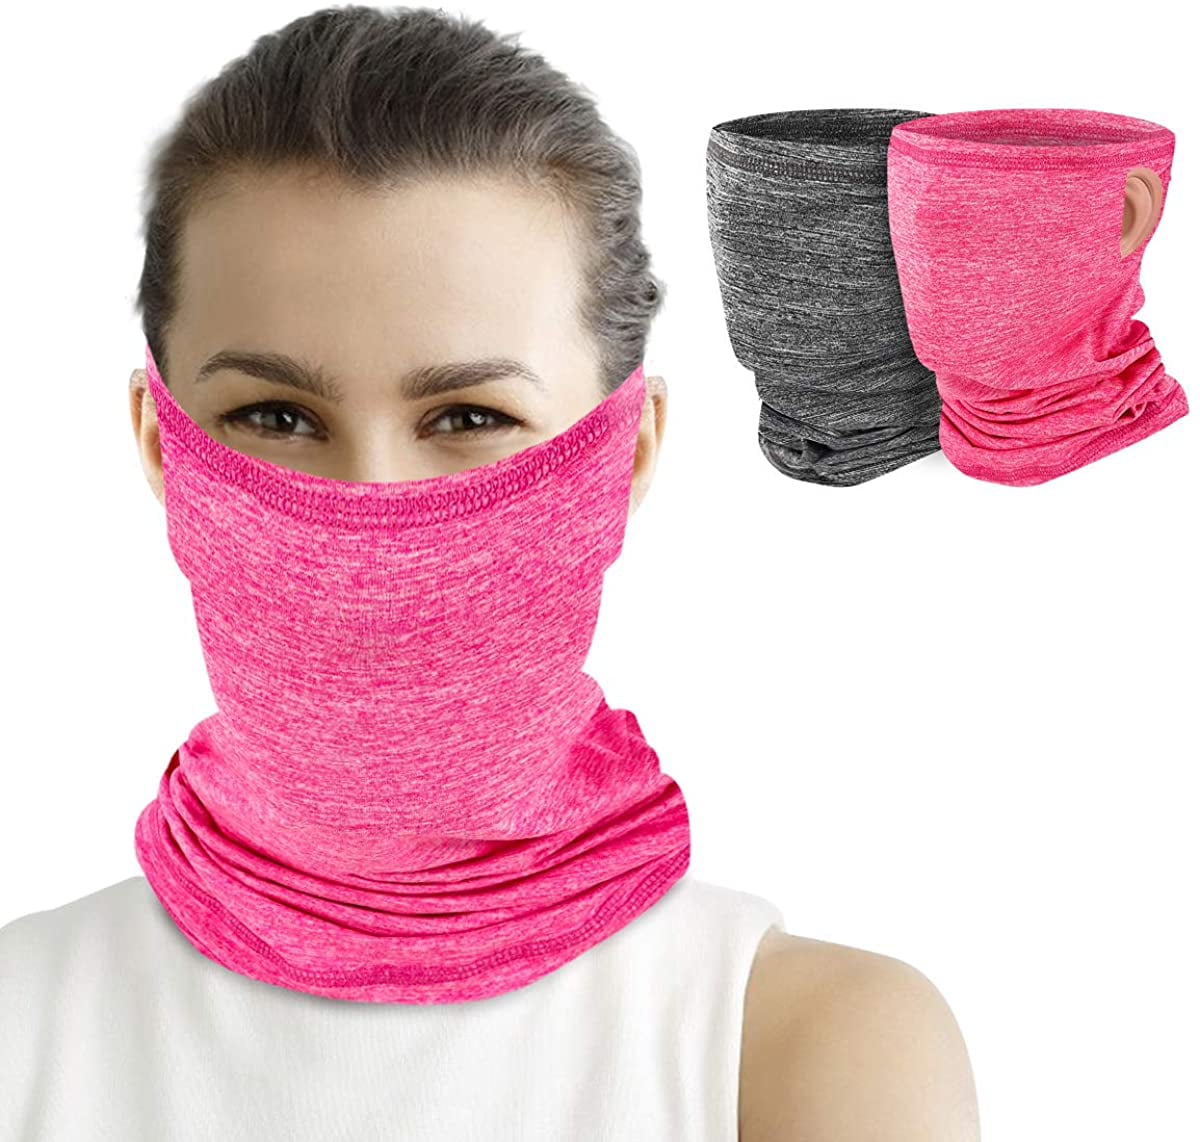 Neck Gaiter Face Cover Scarf for Cold Wind Dust Reusable Balaclava Bandana for Men Women 12 Ways to Wear